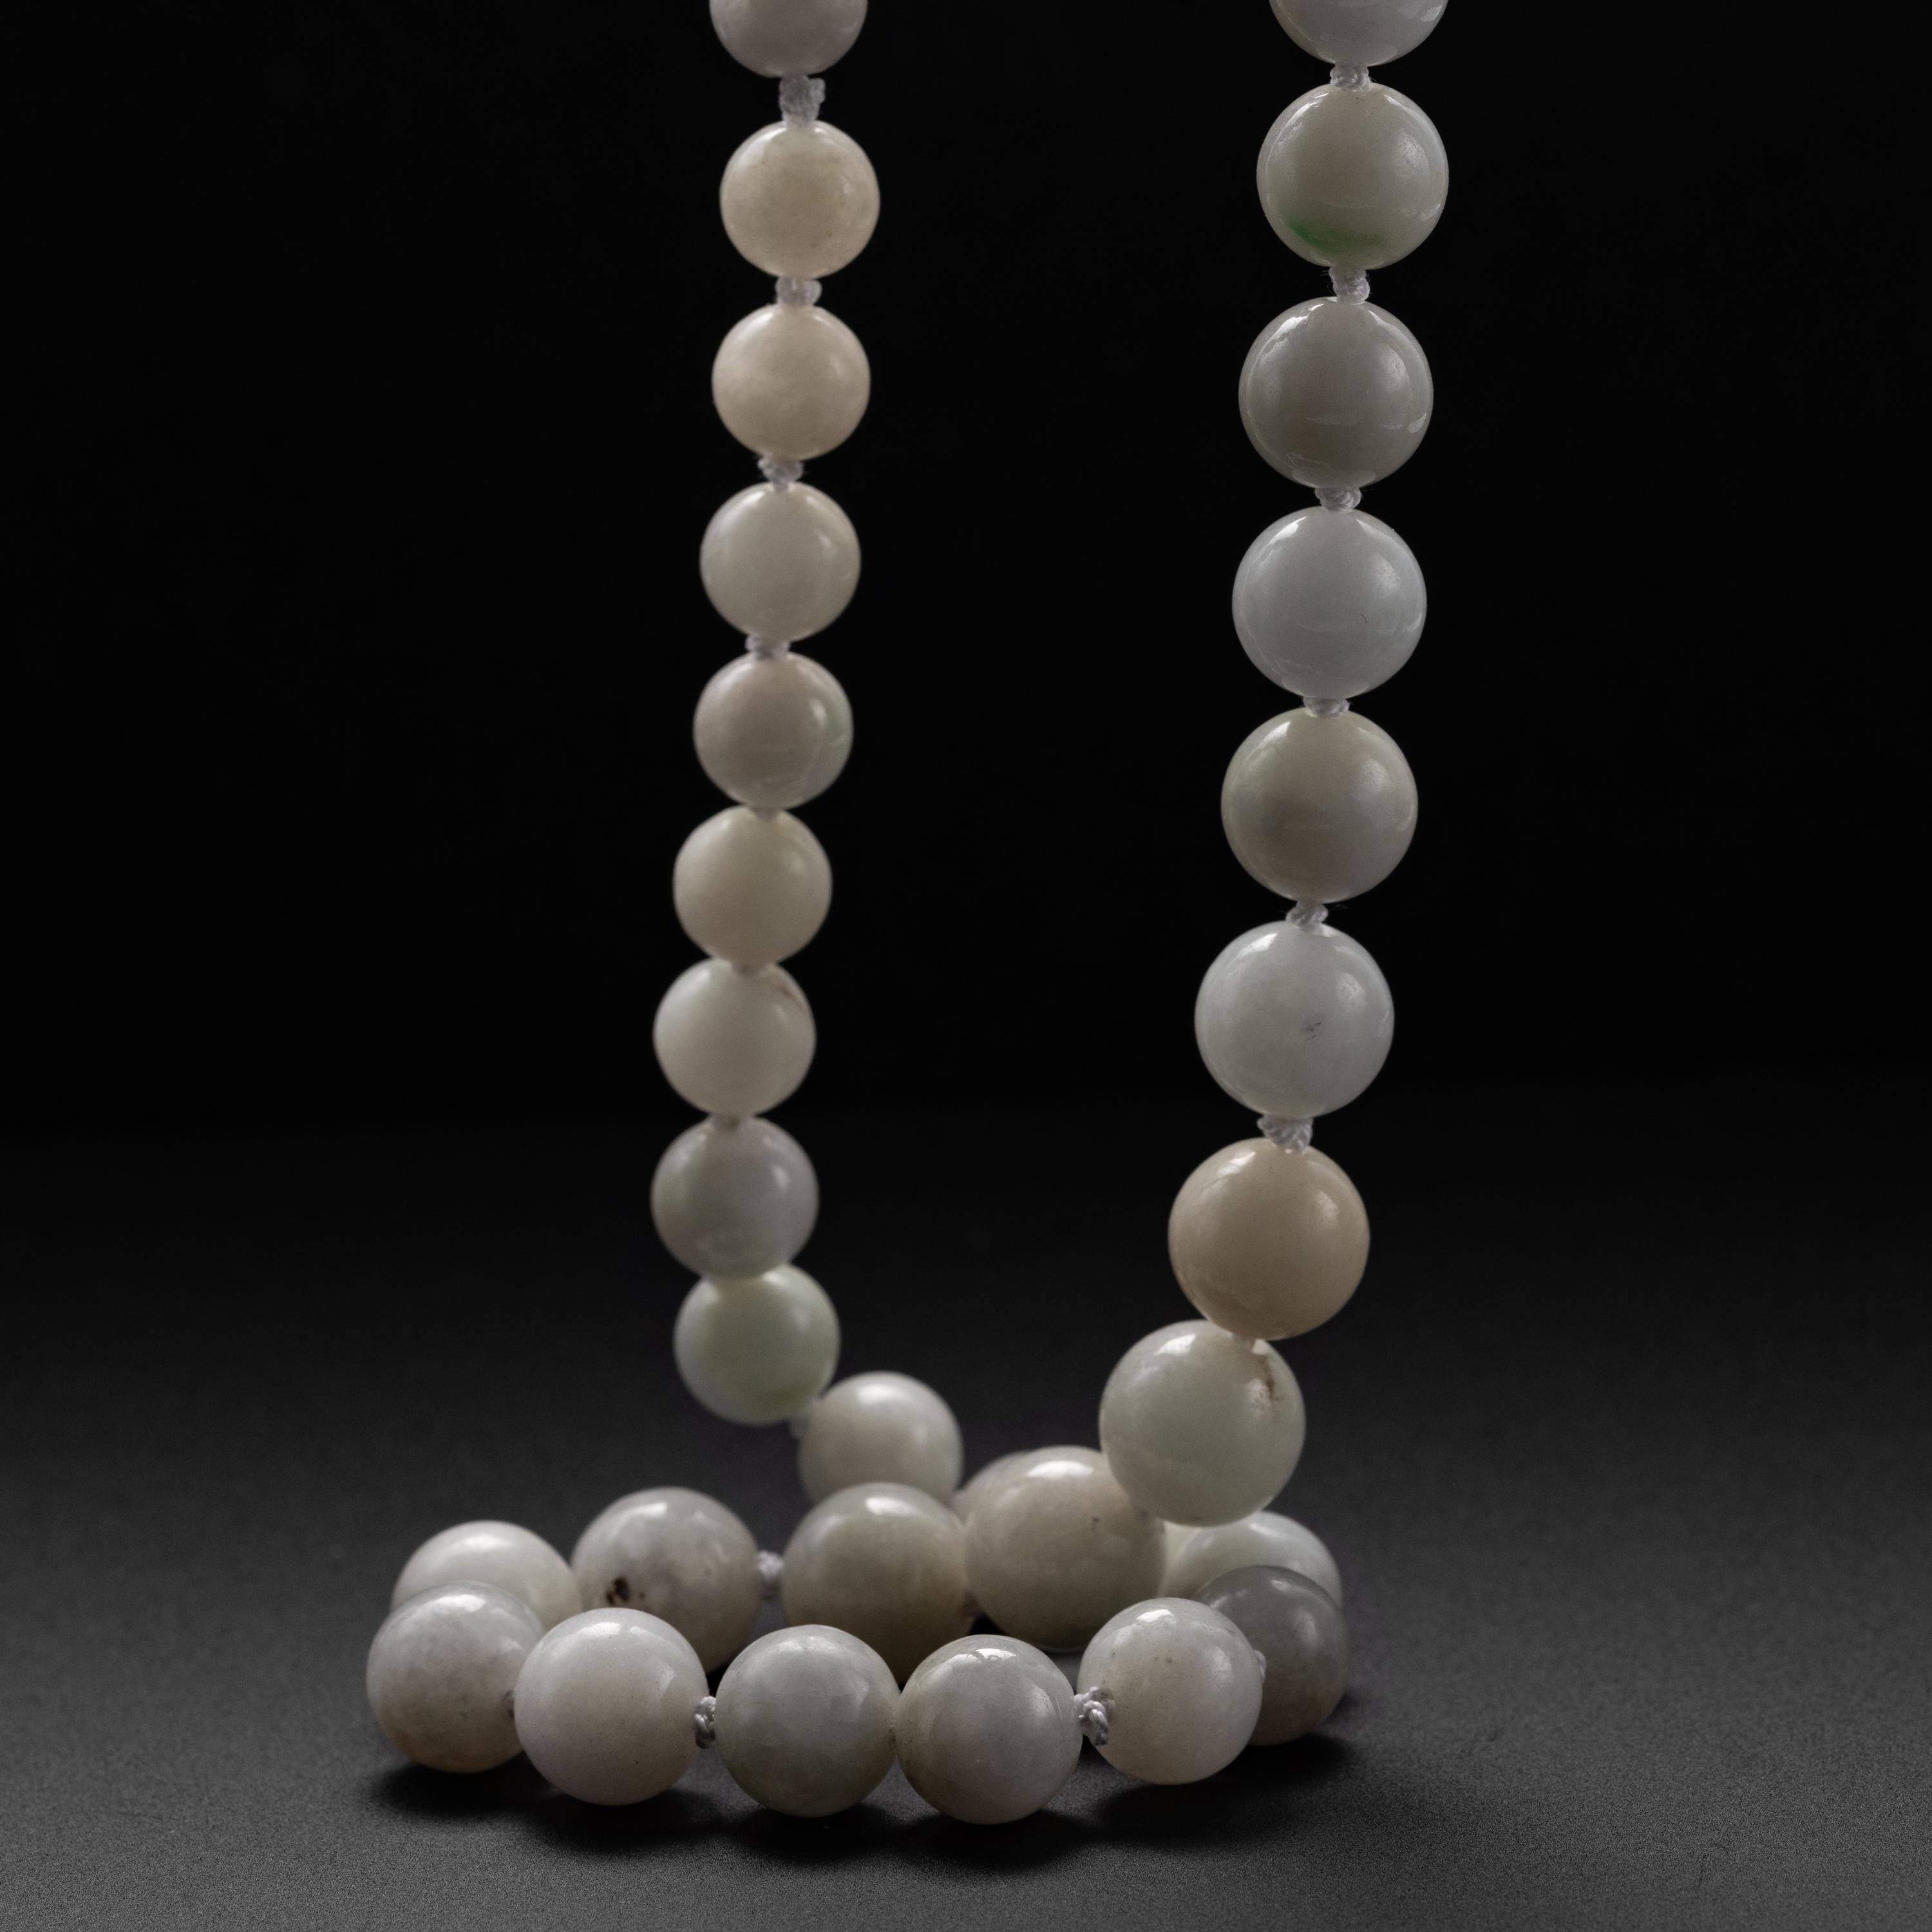 Bead Antique Jade Necklace Like Marbles Made of Fog, Circa 1920s